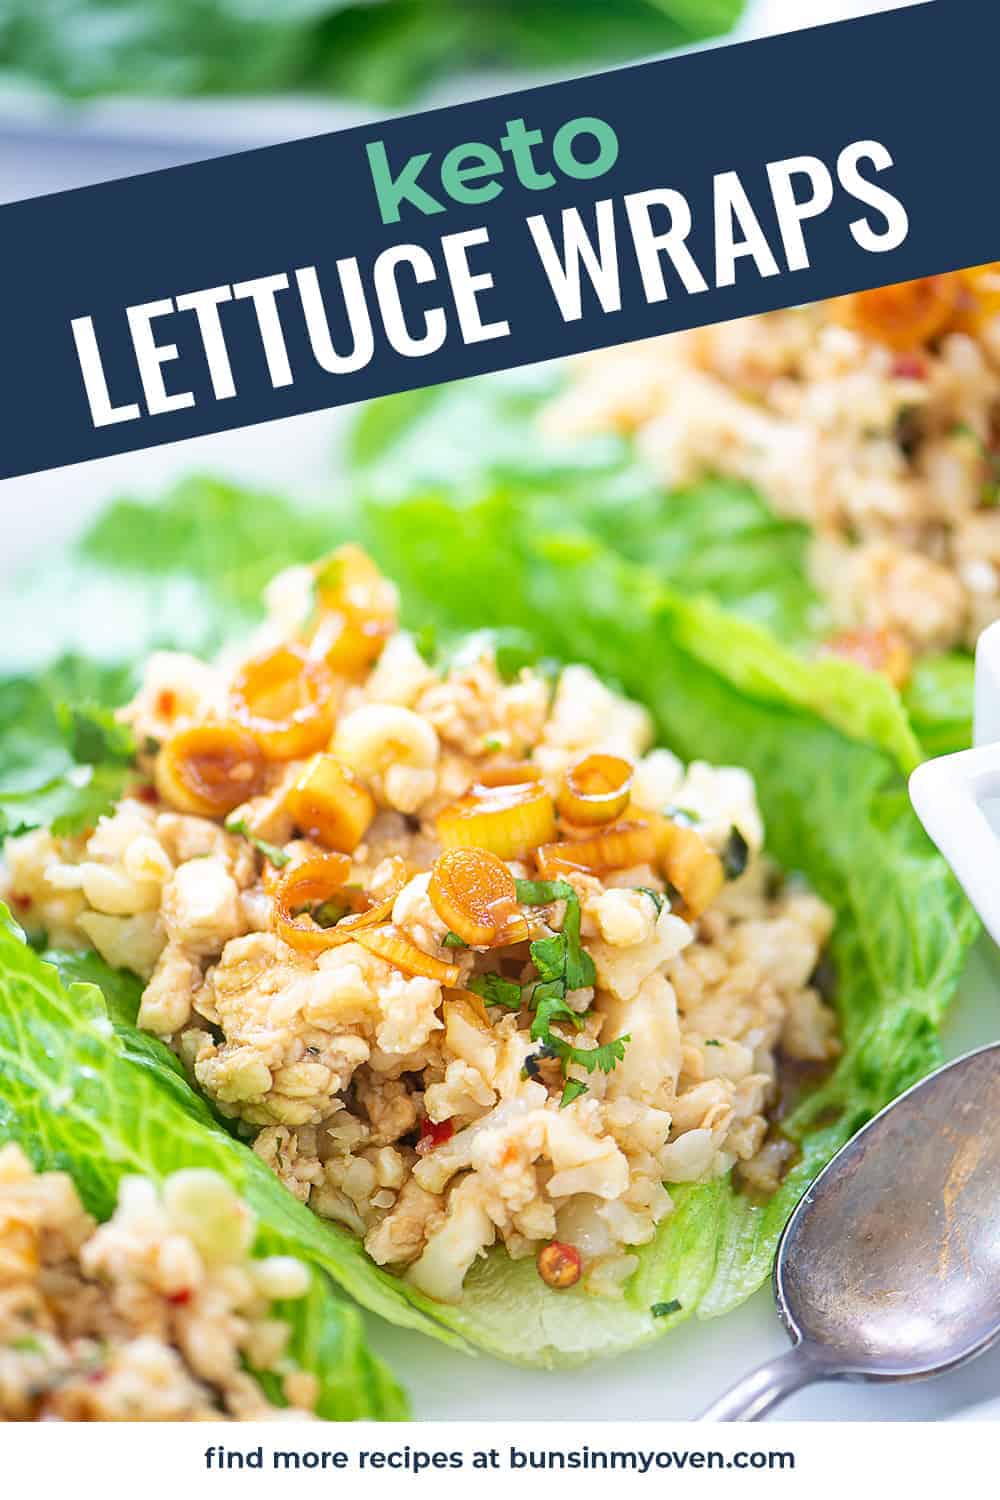 keto lettuce wraps on white plate with text for Pinterest.